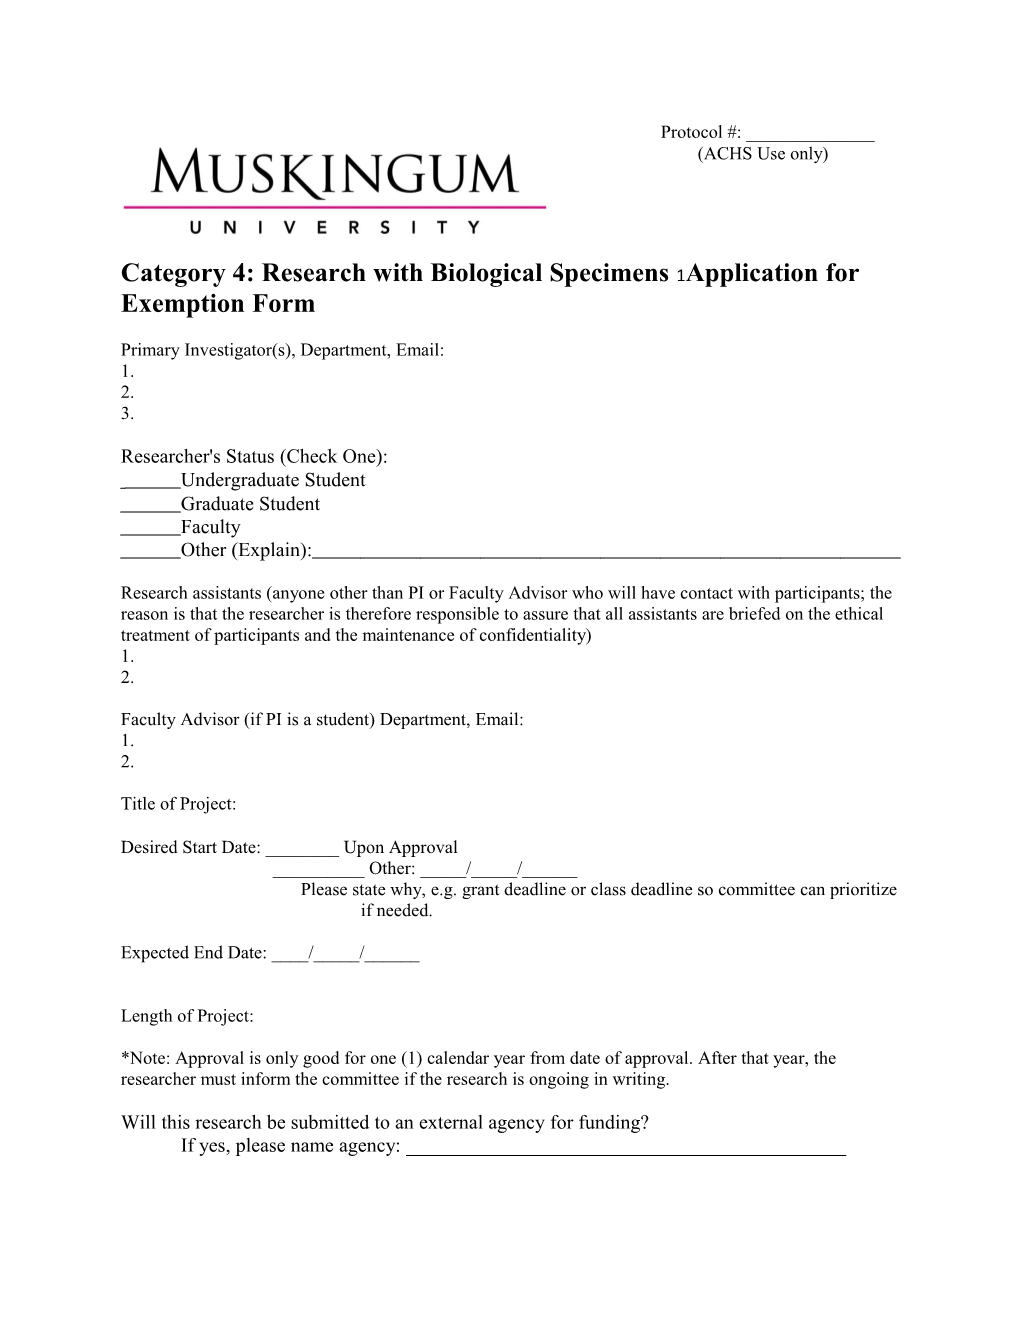 Category 4: Research with Biological Specimens Application for Exemption Form